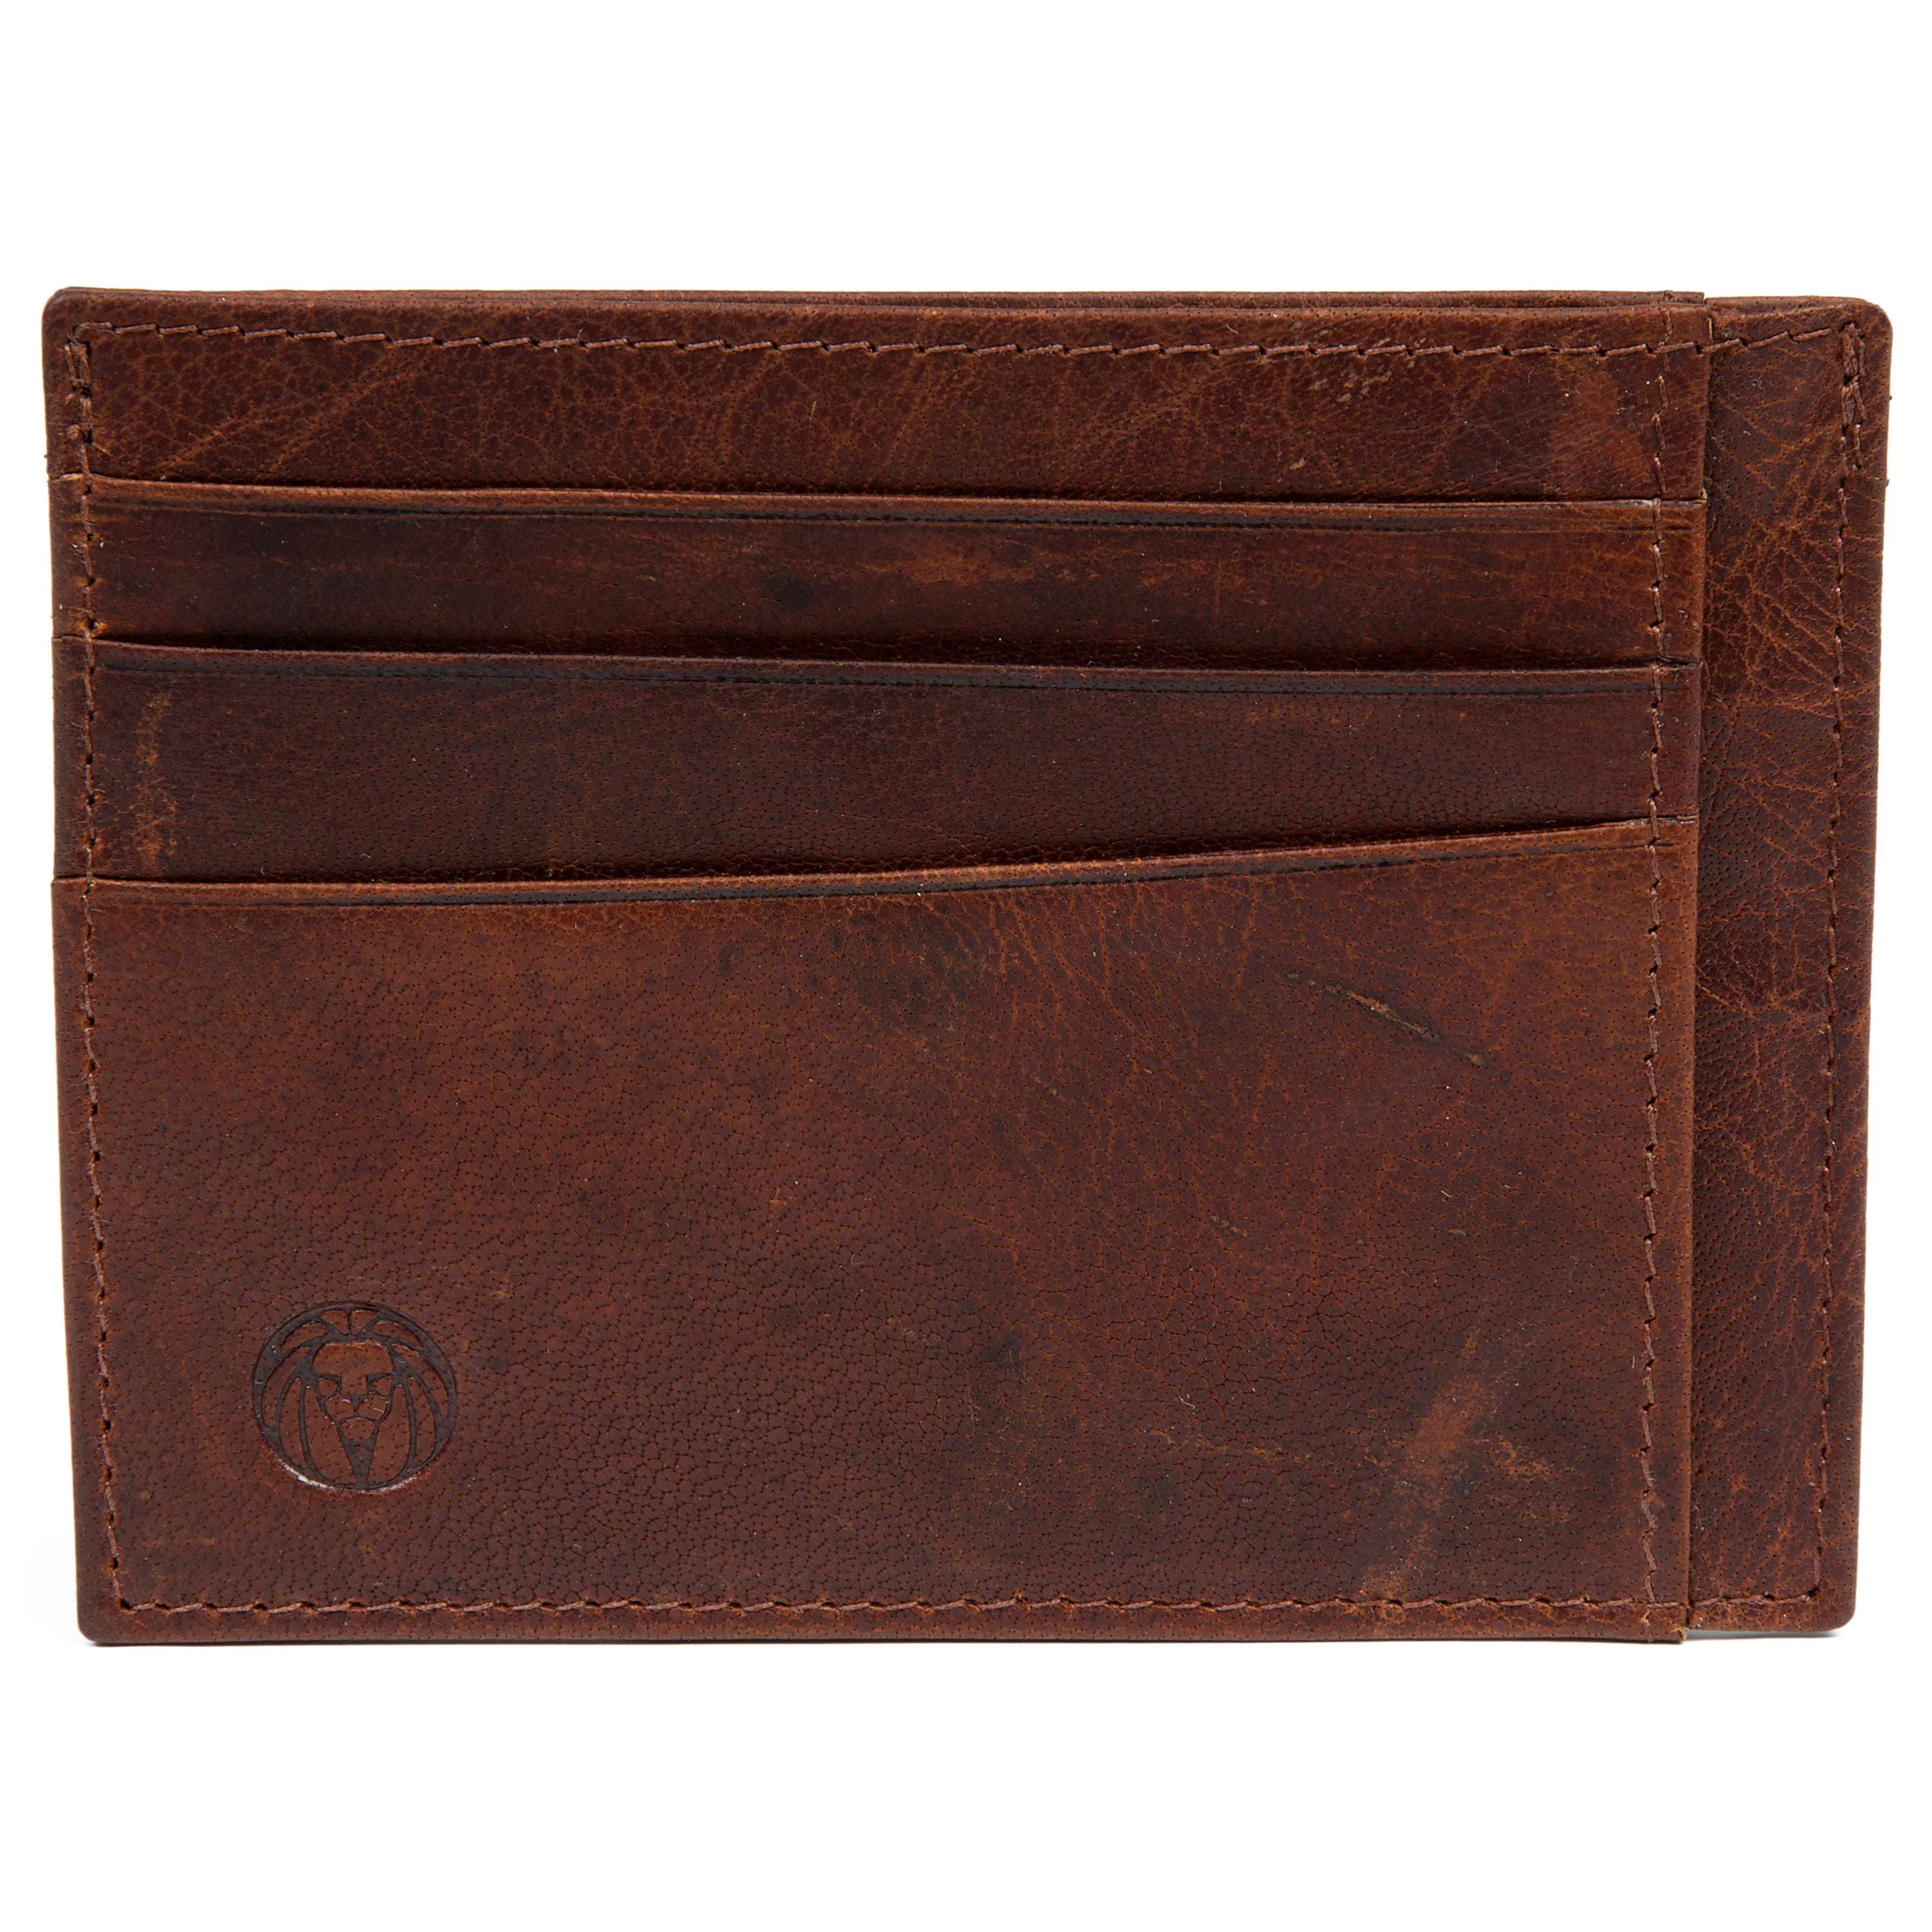 Montreal | Tan RFID Leather Card Holder